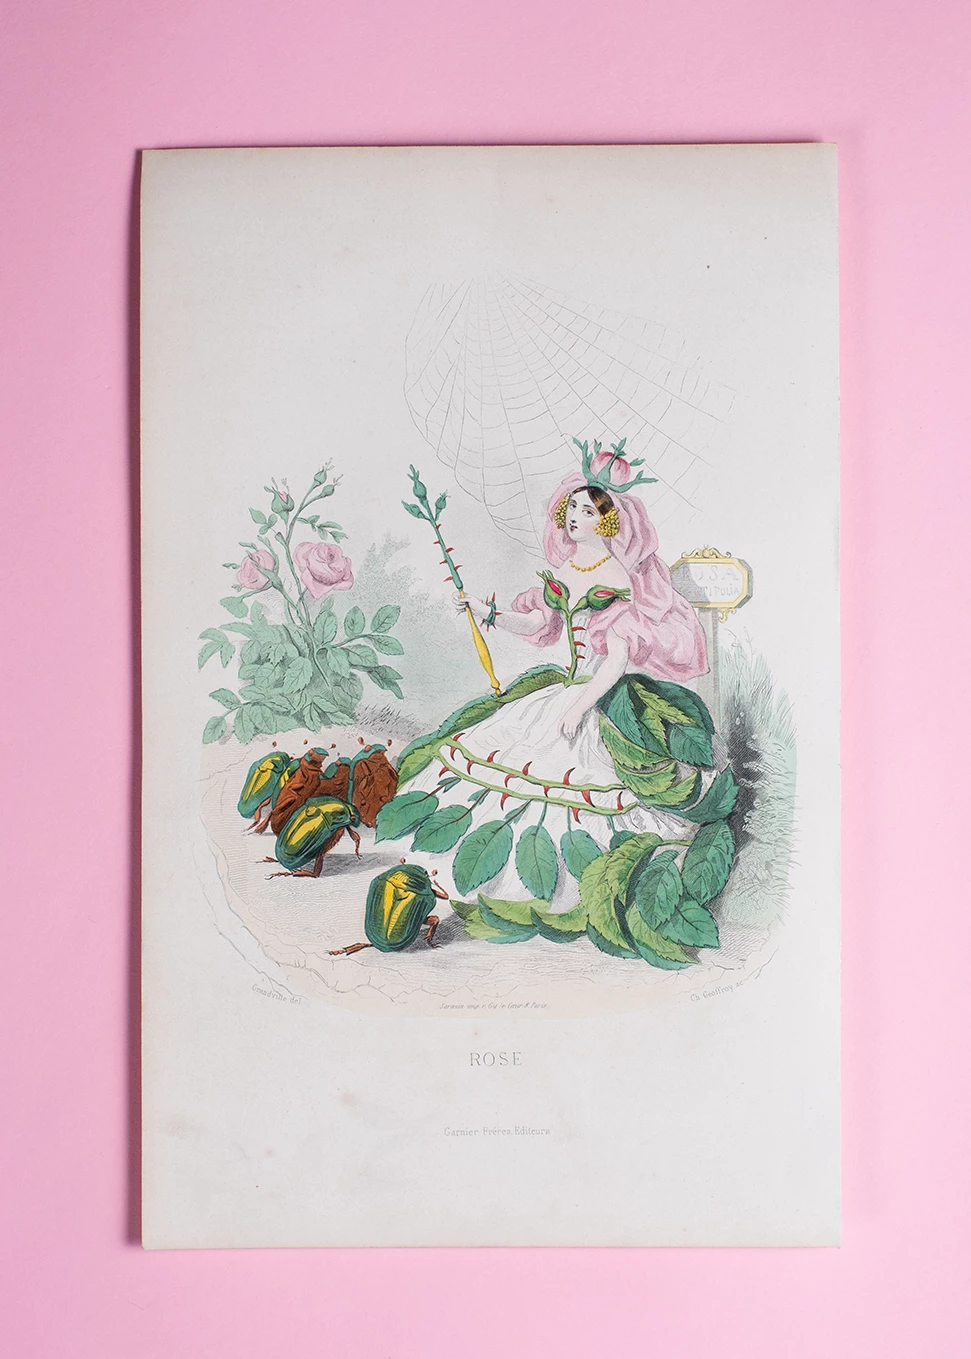 <em>Wild and Cultivated: Fashioning The Rose</em> celebrates fashion’s love affair with roses J J Grandville ‘Rose coloured engraving from Les Fleurs Animées 1847